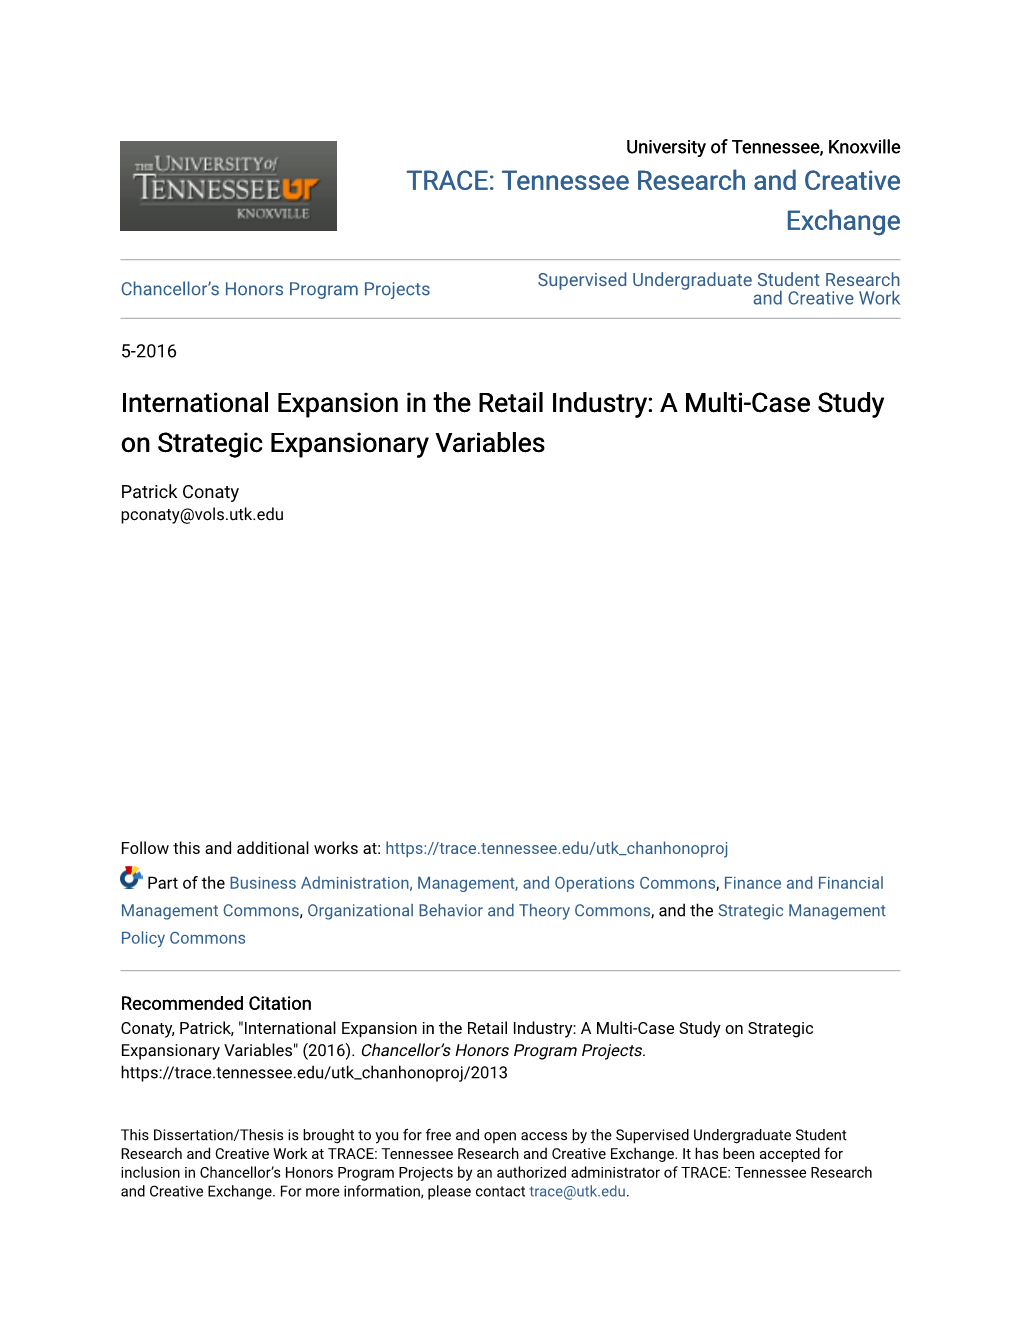 International Expansion in the Retail Industry: a Multi-Case Study on Strategic Expansionary Variables